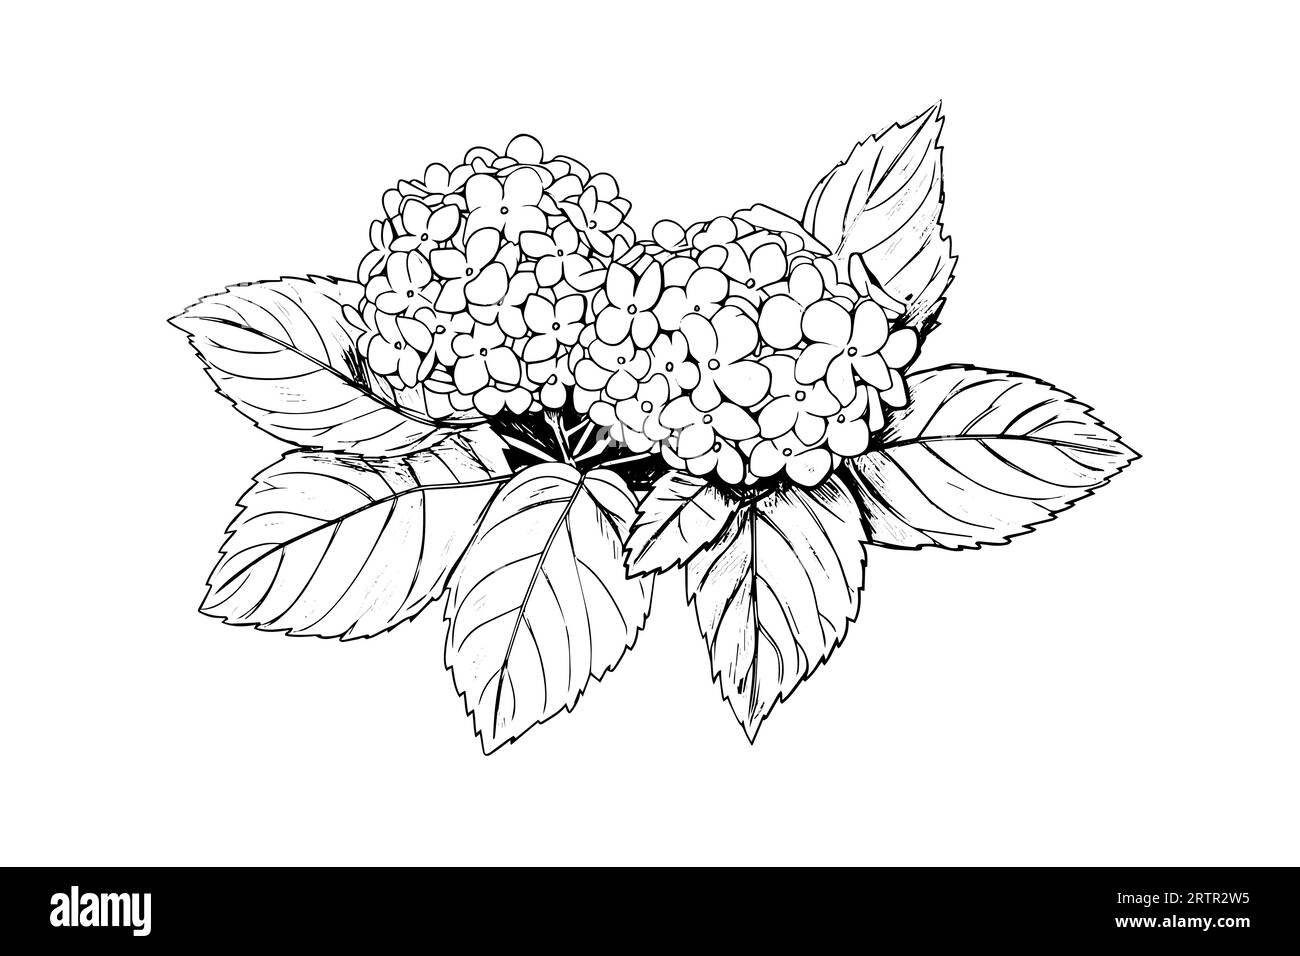 https://c8.alamy.com/comp/2RTR2W5/hand-drawn-ink-sketch-hydrangea-flowers-vector-illustration-in-engraving-style-2RTR2W5.jpg